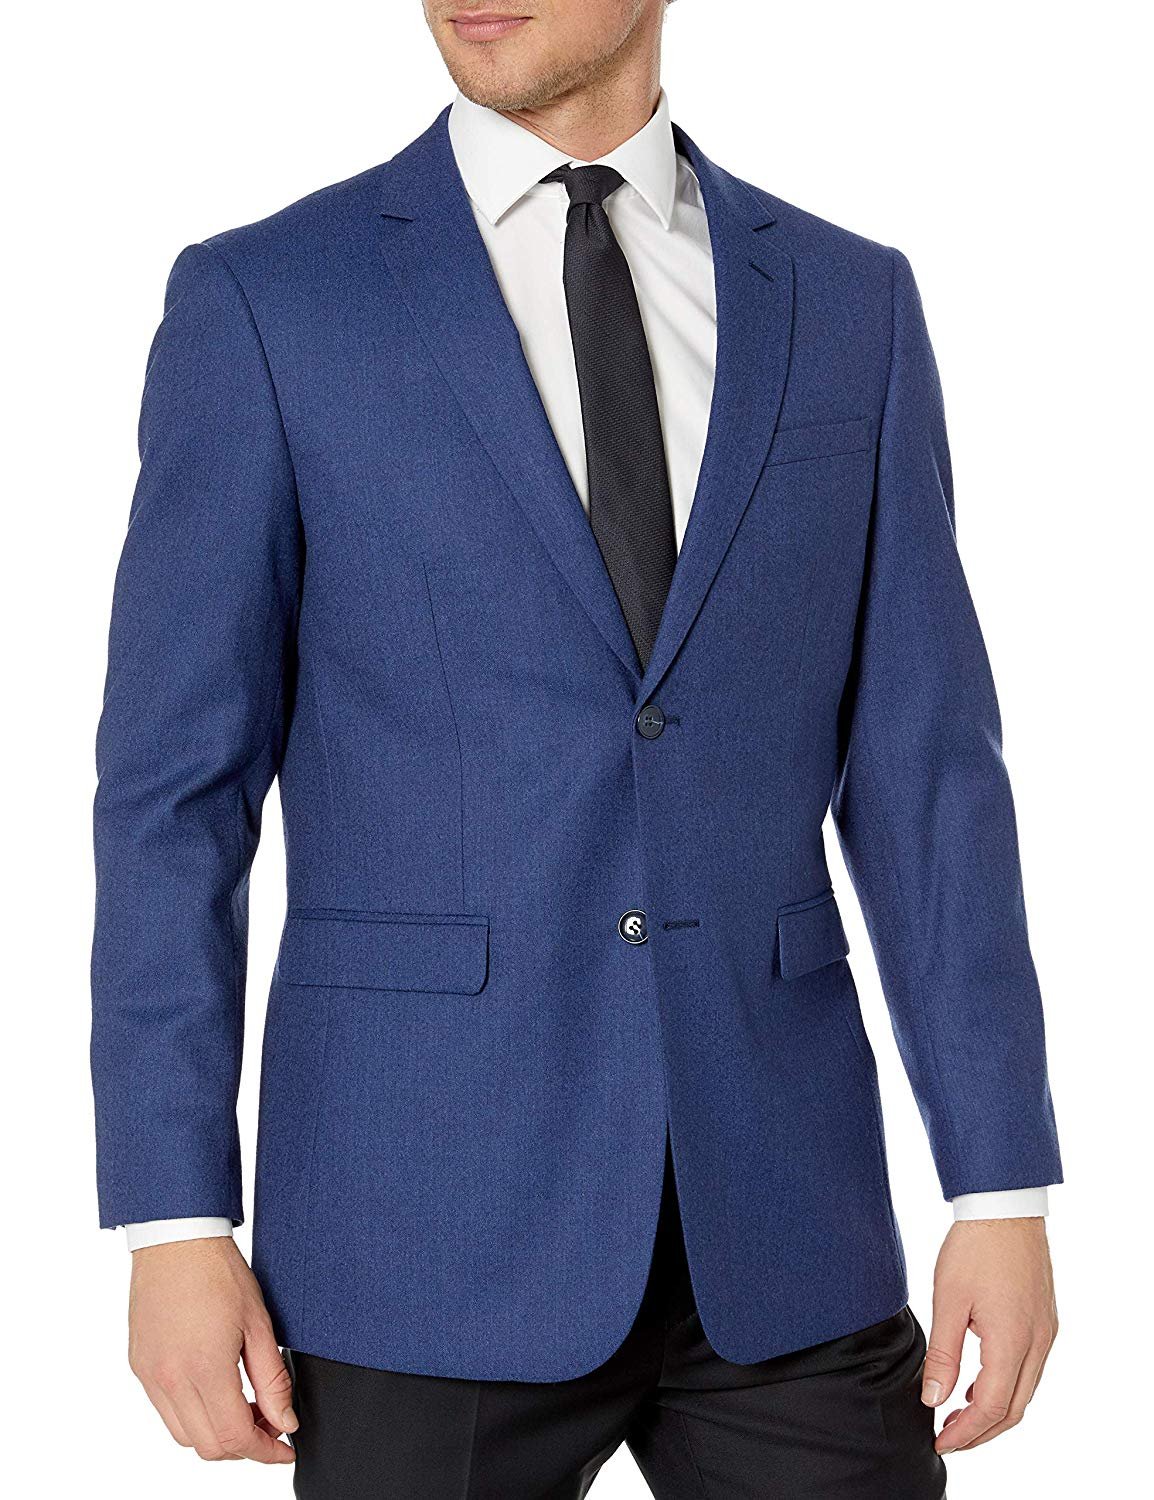 Adam Baker Men's Single Breasted 100% Wool Ultra Slim Fit Blazer/Sport Coat Many Styles and Colors 